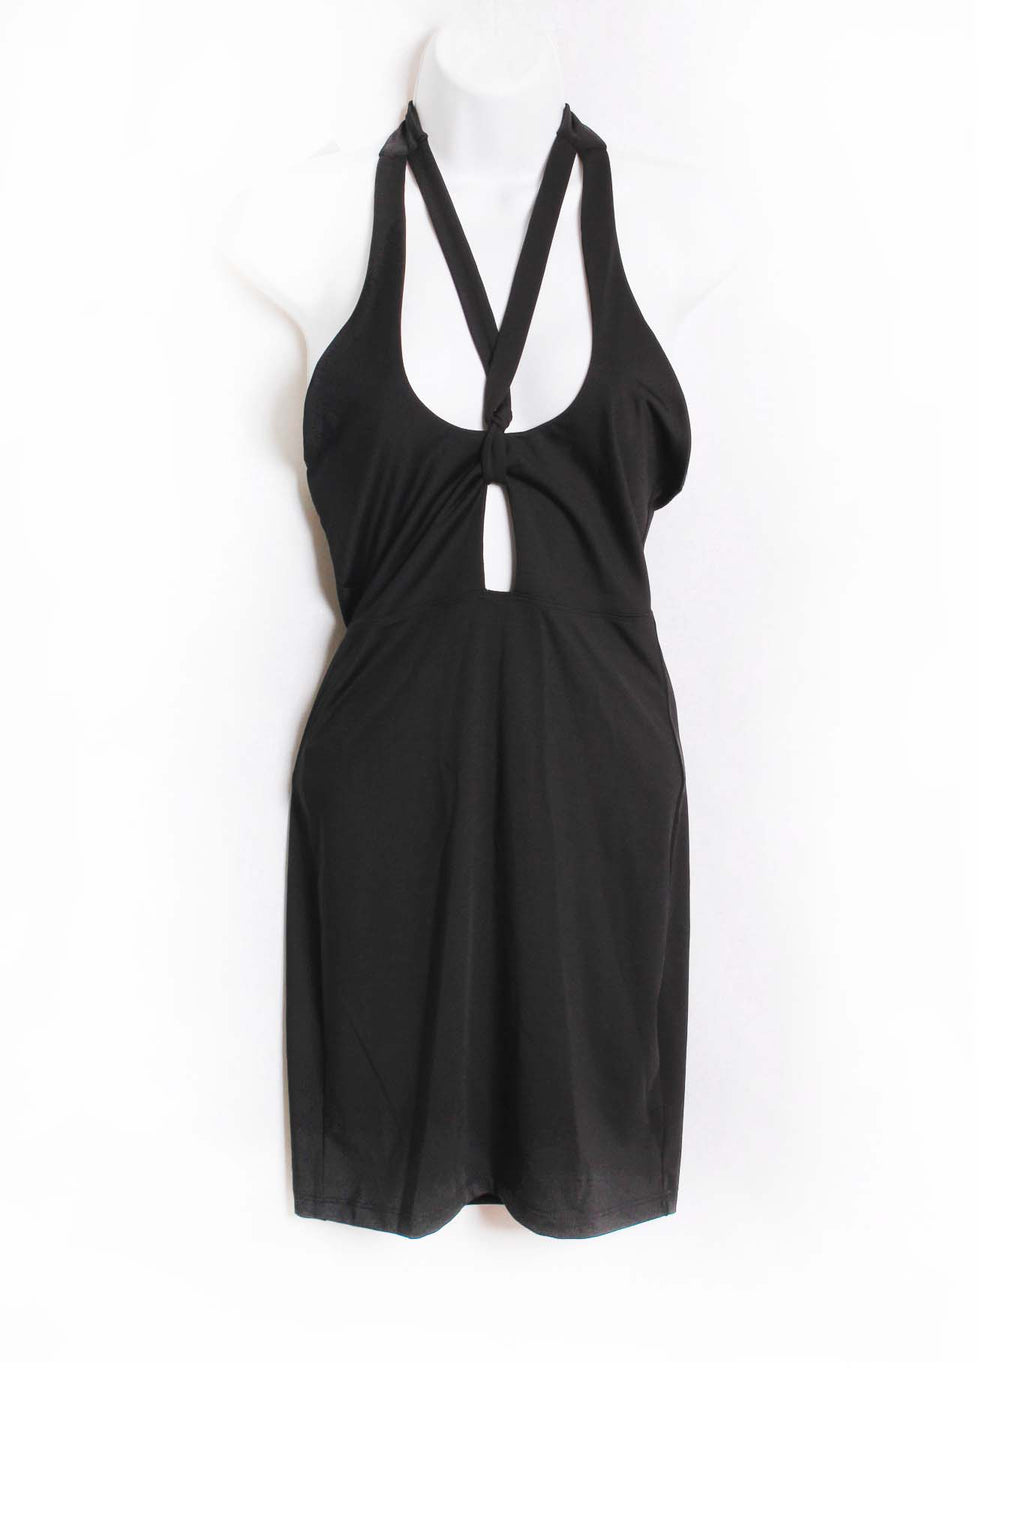 Women's Sleeveless Strappy Cut Out Front Mini Dress